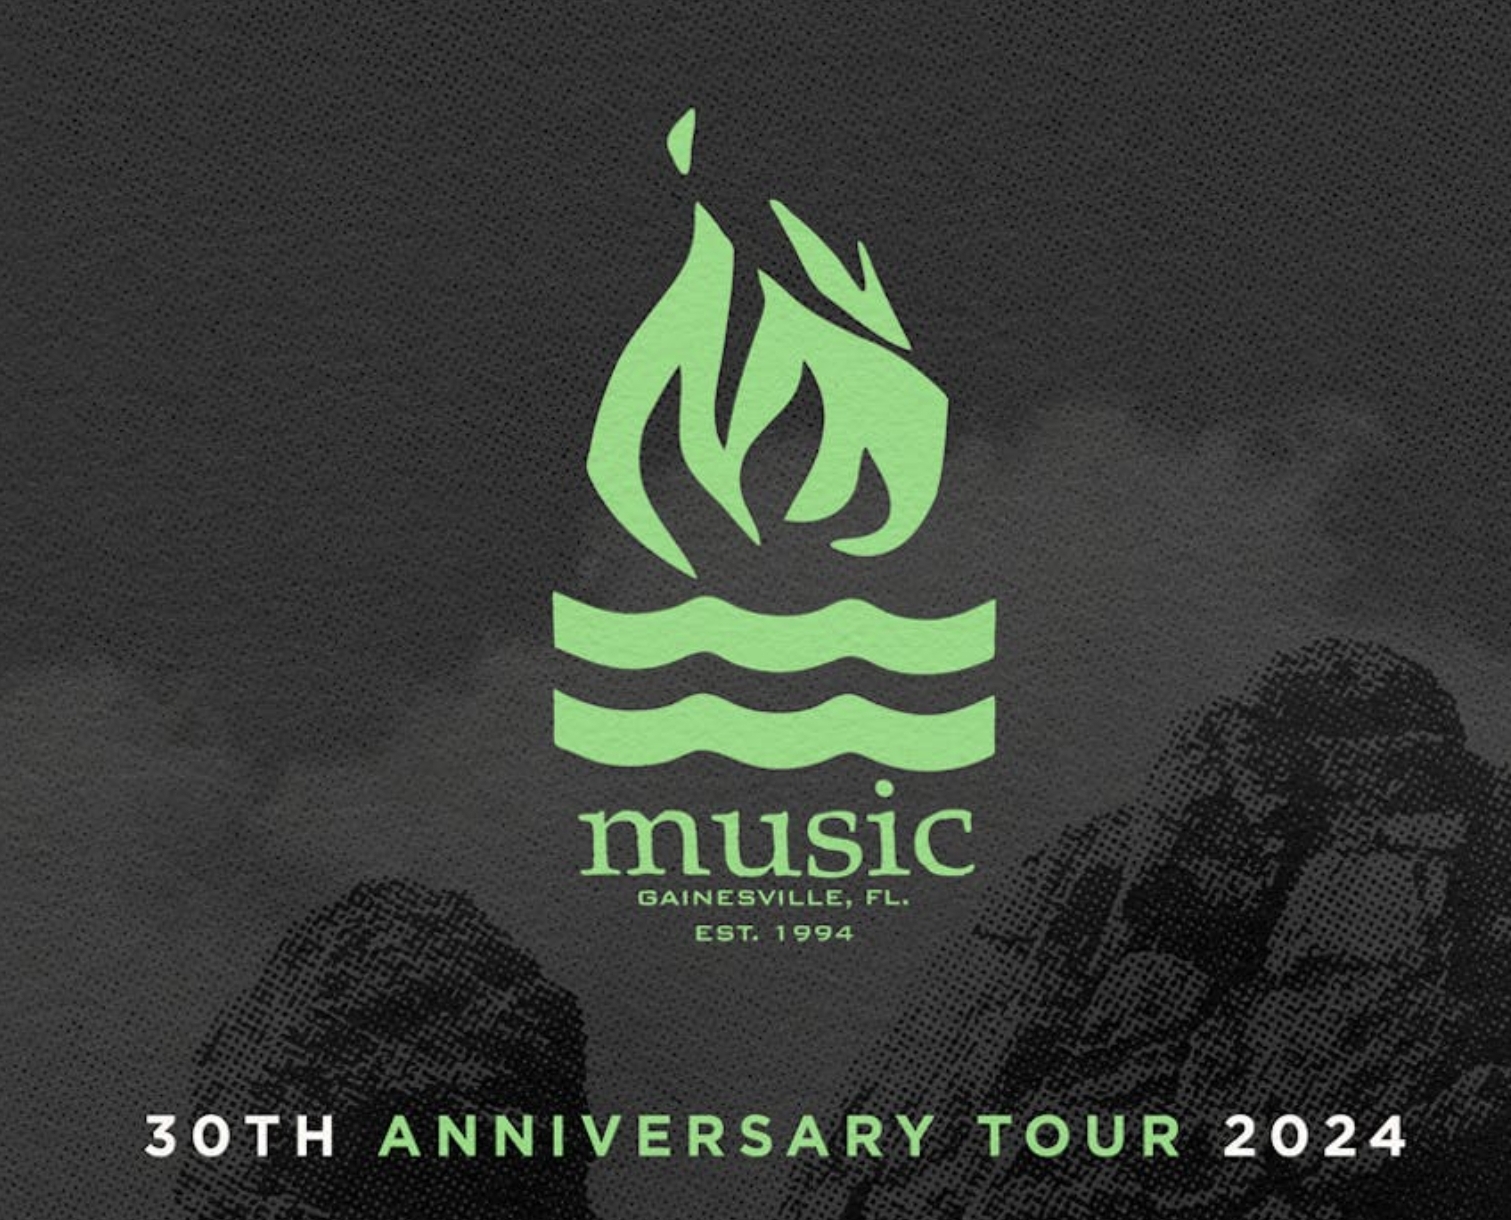 Hot Water Music - 30th Anniversary Tour 2024 in der Skaters Palace Tickets